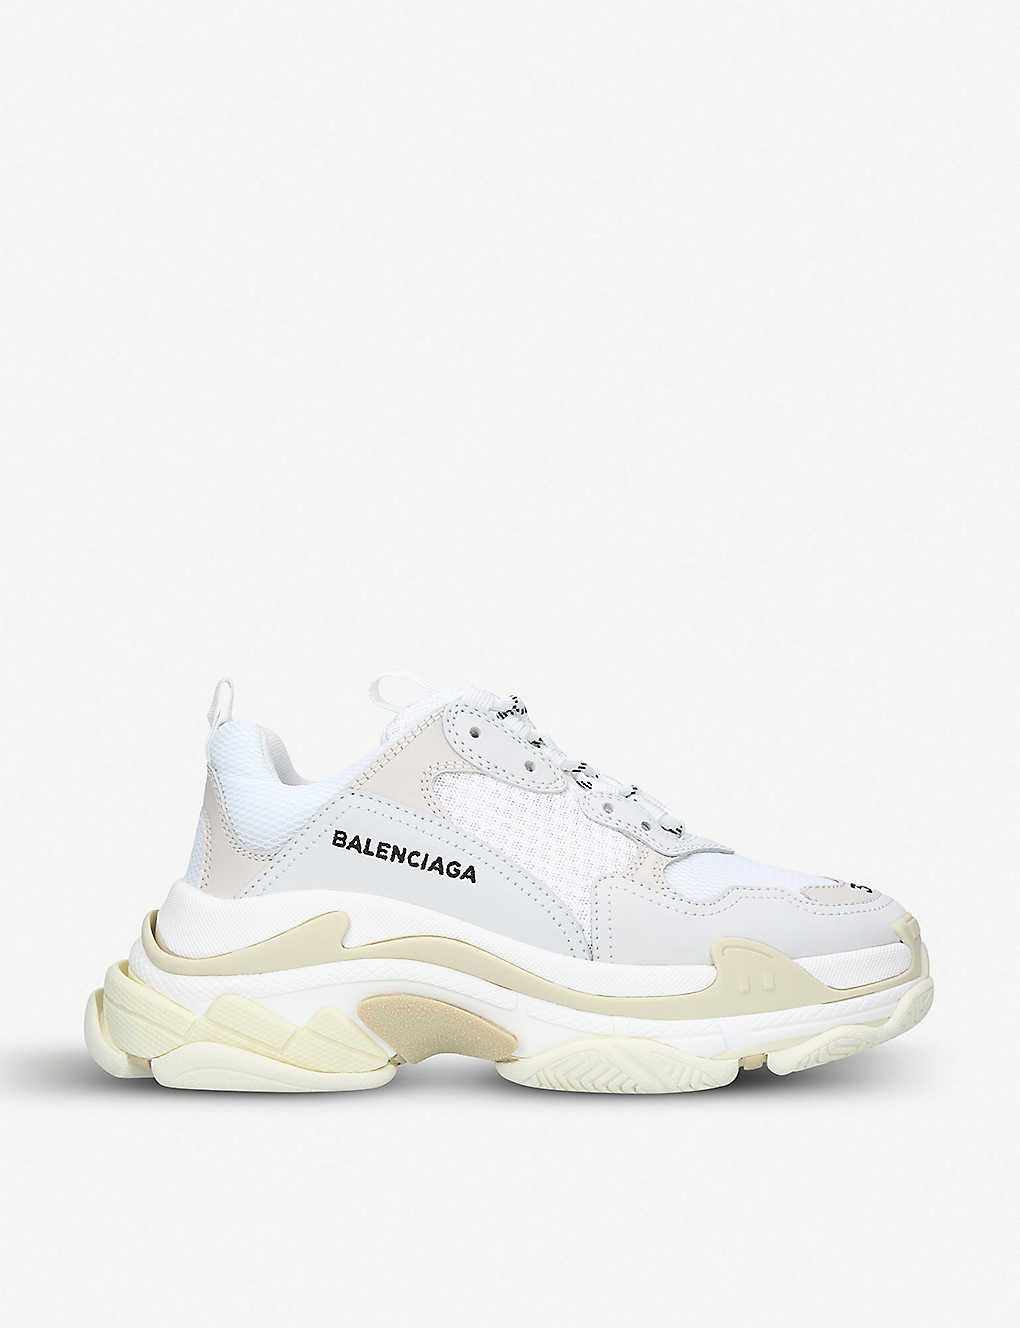 Balenciaga Leather Triple S Trainer Sneakers in Black for